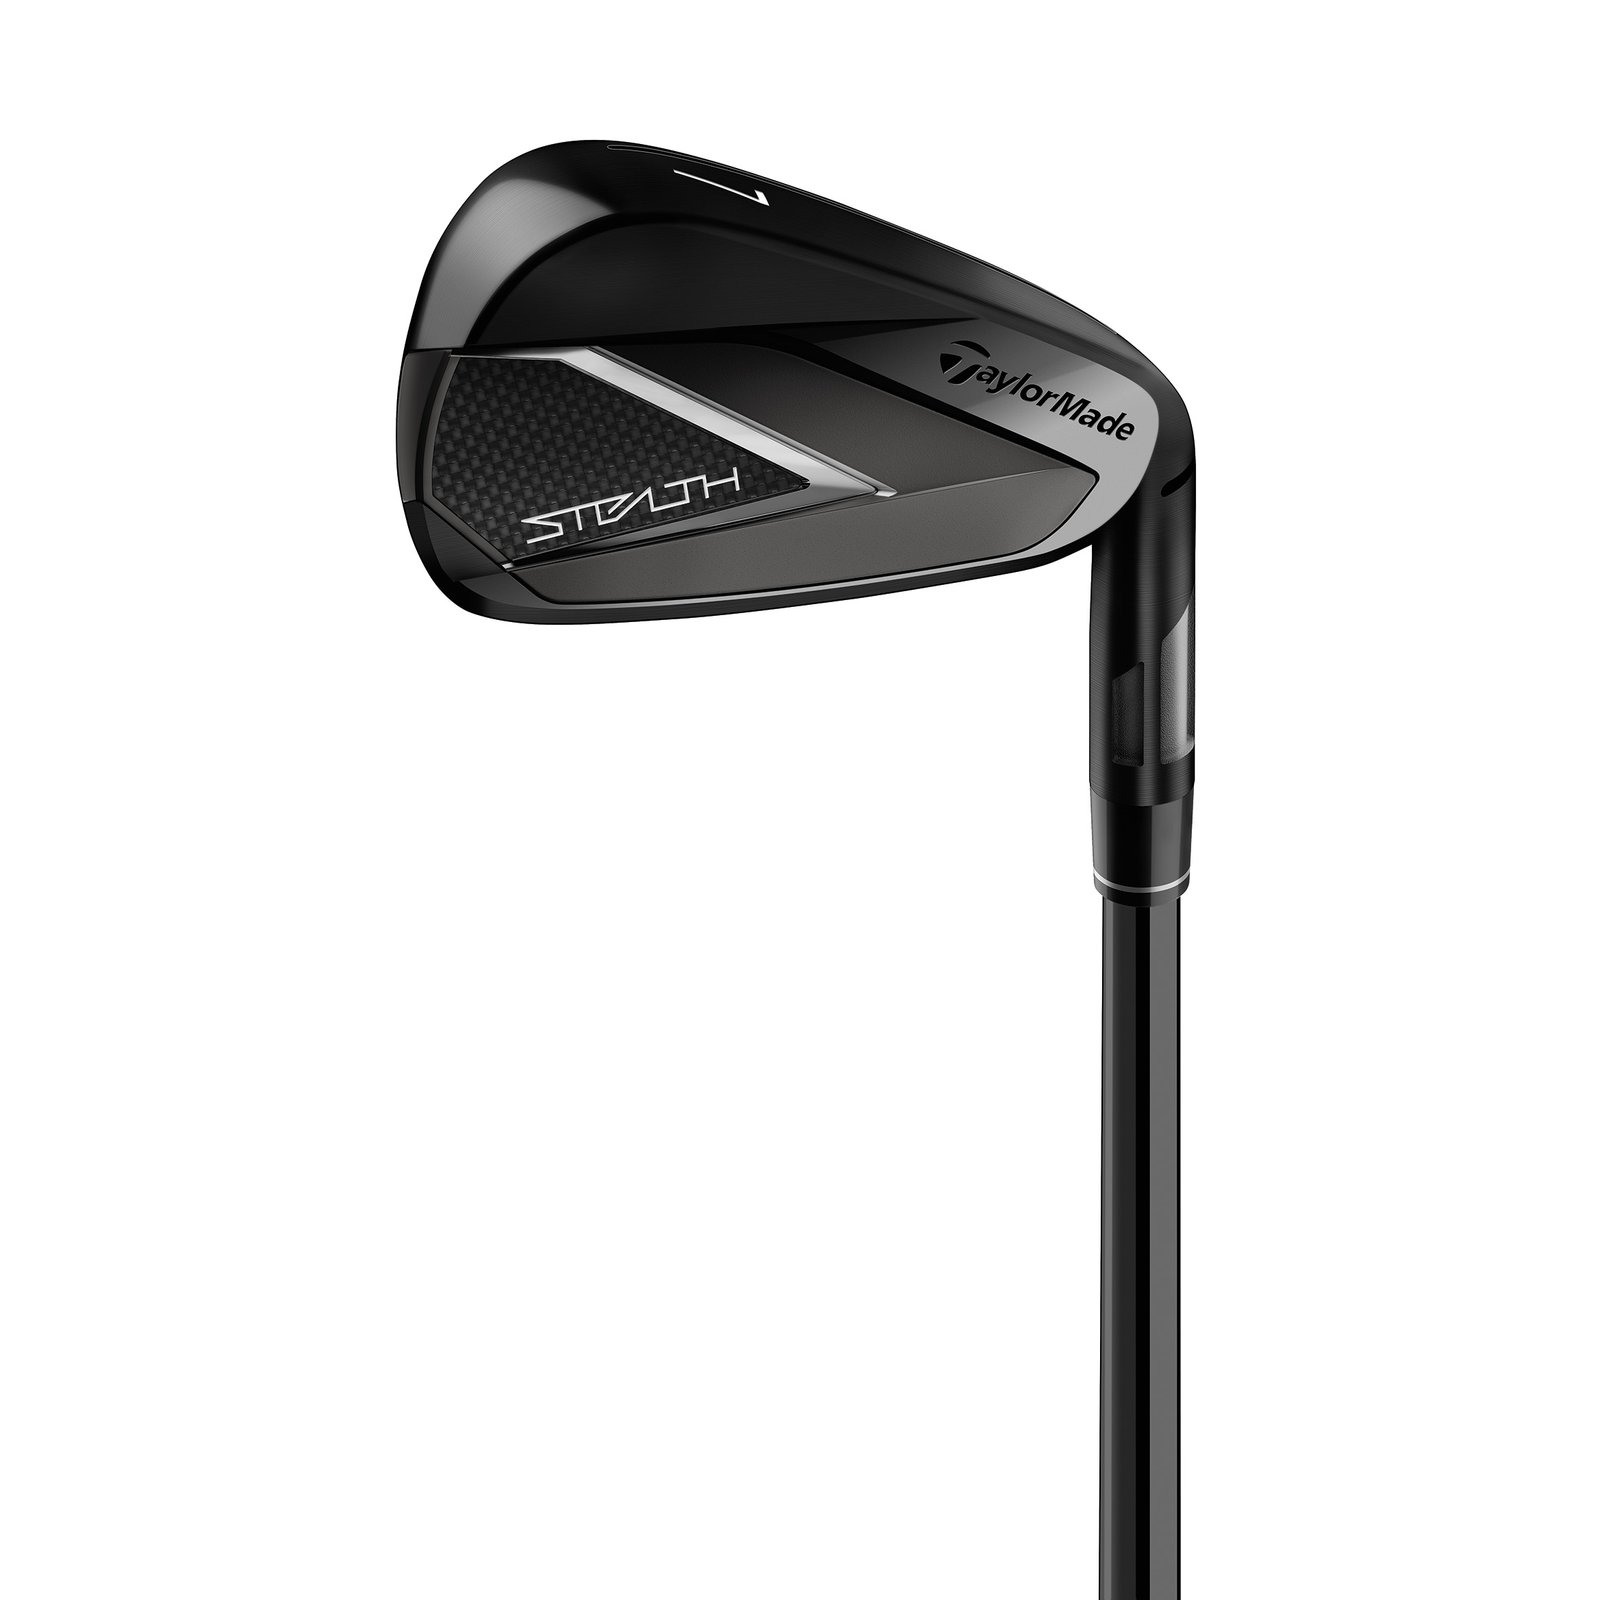 Stealth Black Irons